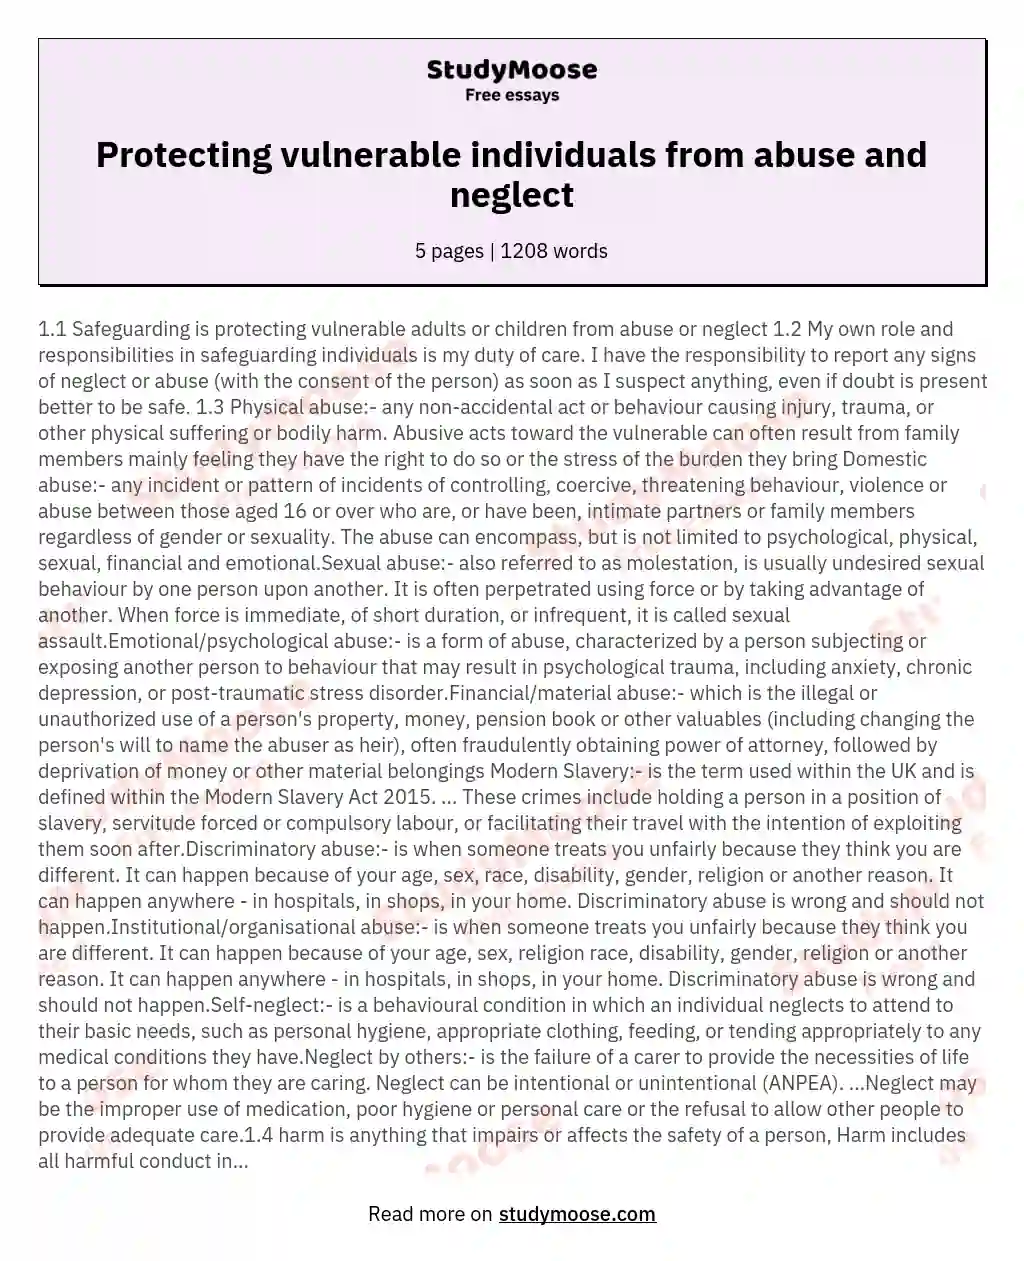 Safeguarding is protecting vulnerable adults or children from abuse or neglect 12 My